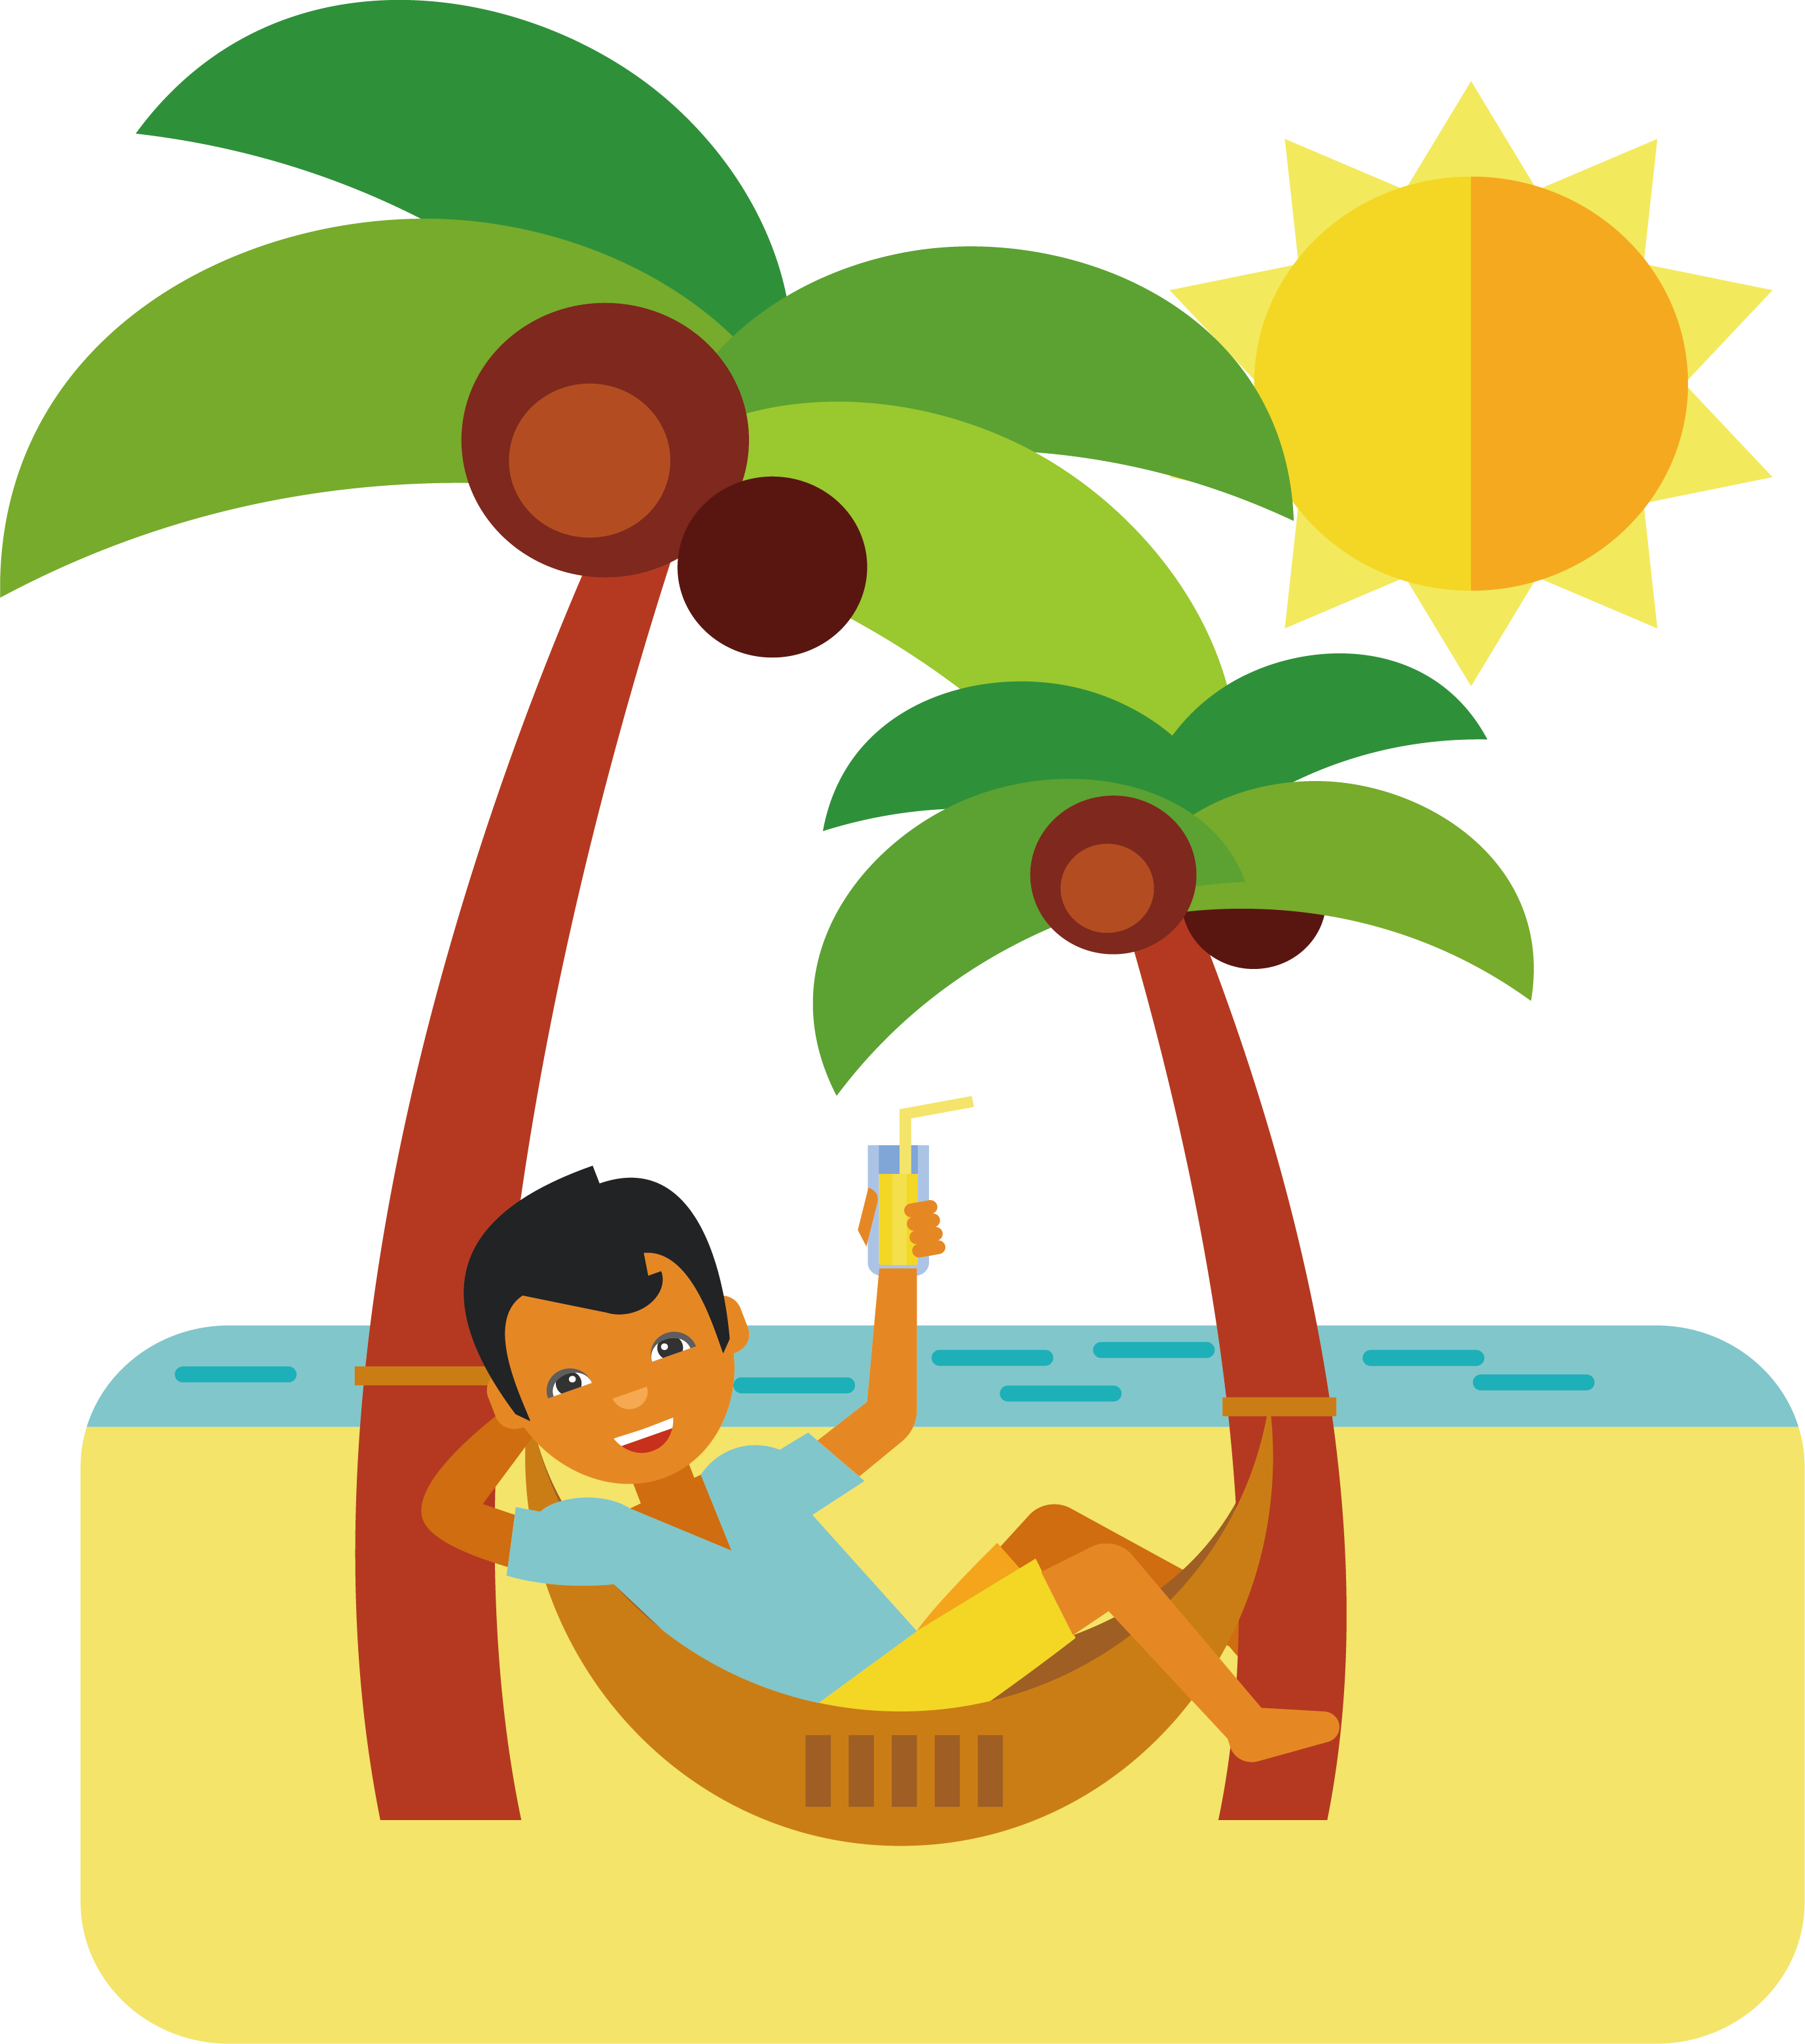 A Cartoon Of A Man In A Hammock With A Drink